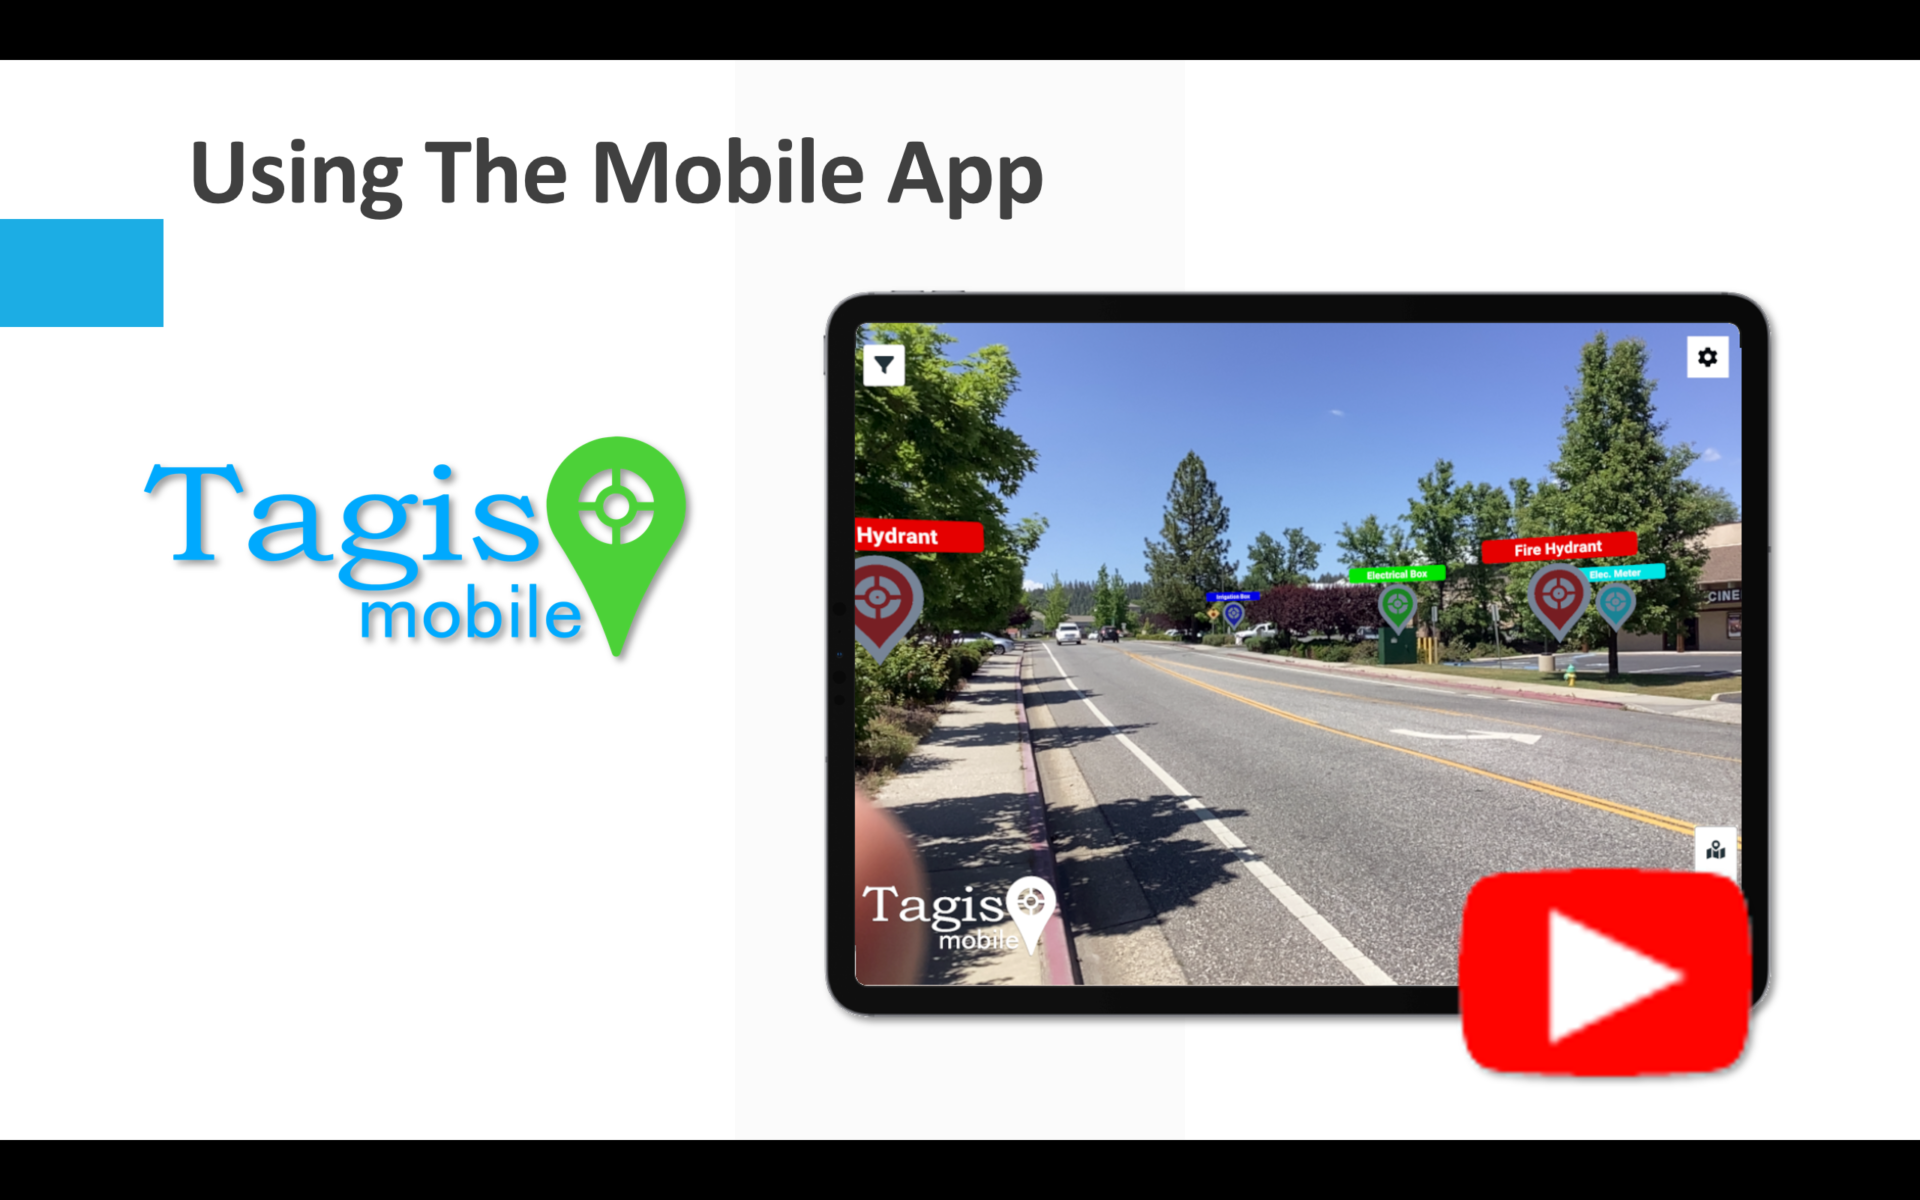 Using the Tagis Mobile App